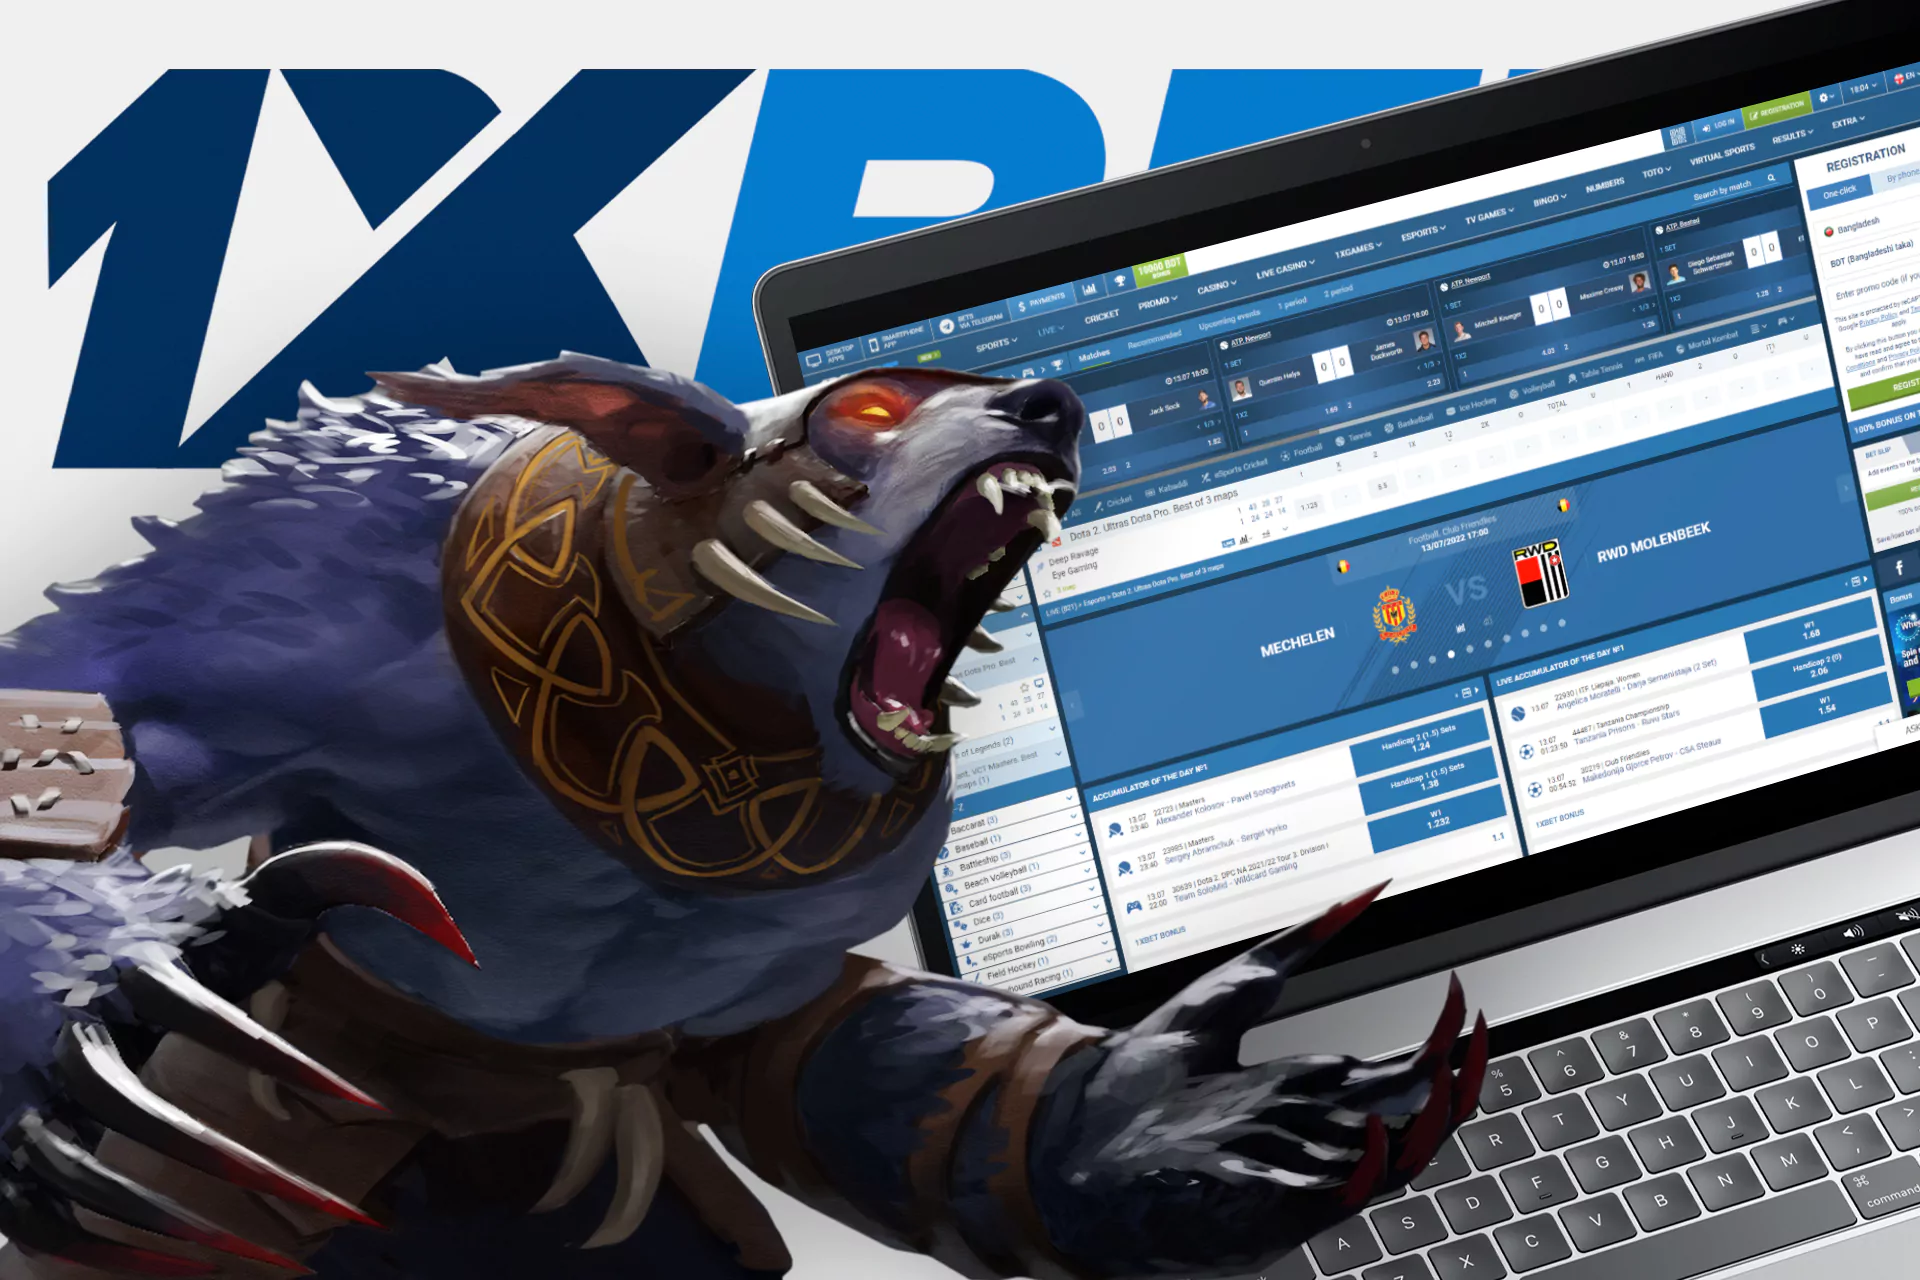 To start betting on the Dota 2 events, you need to sign up.